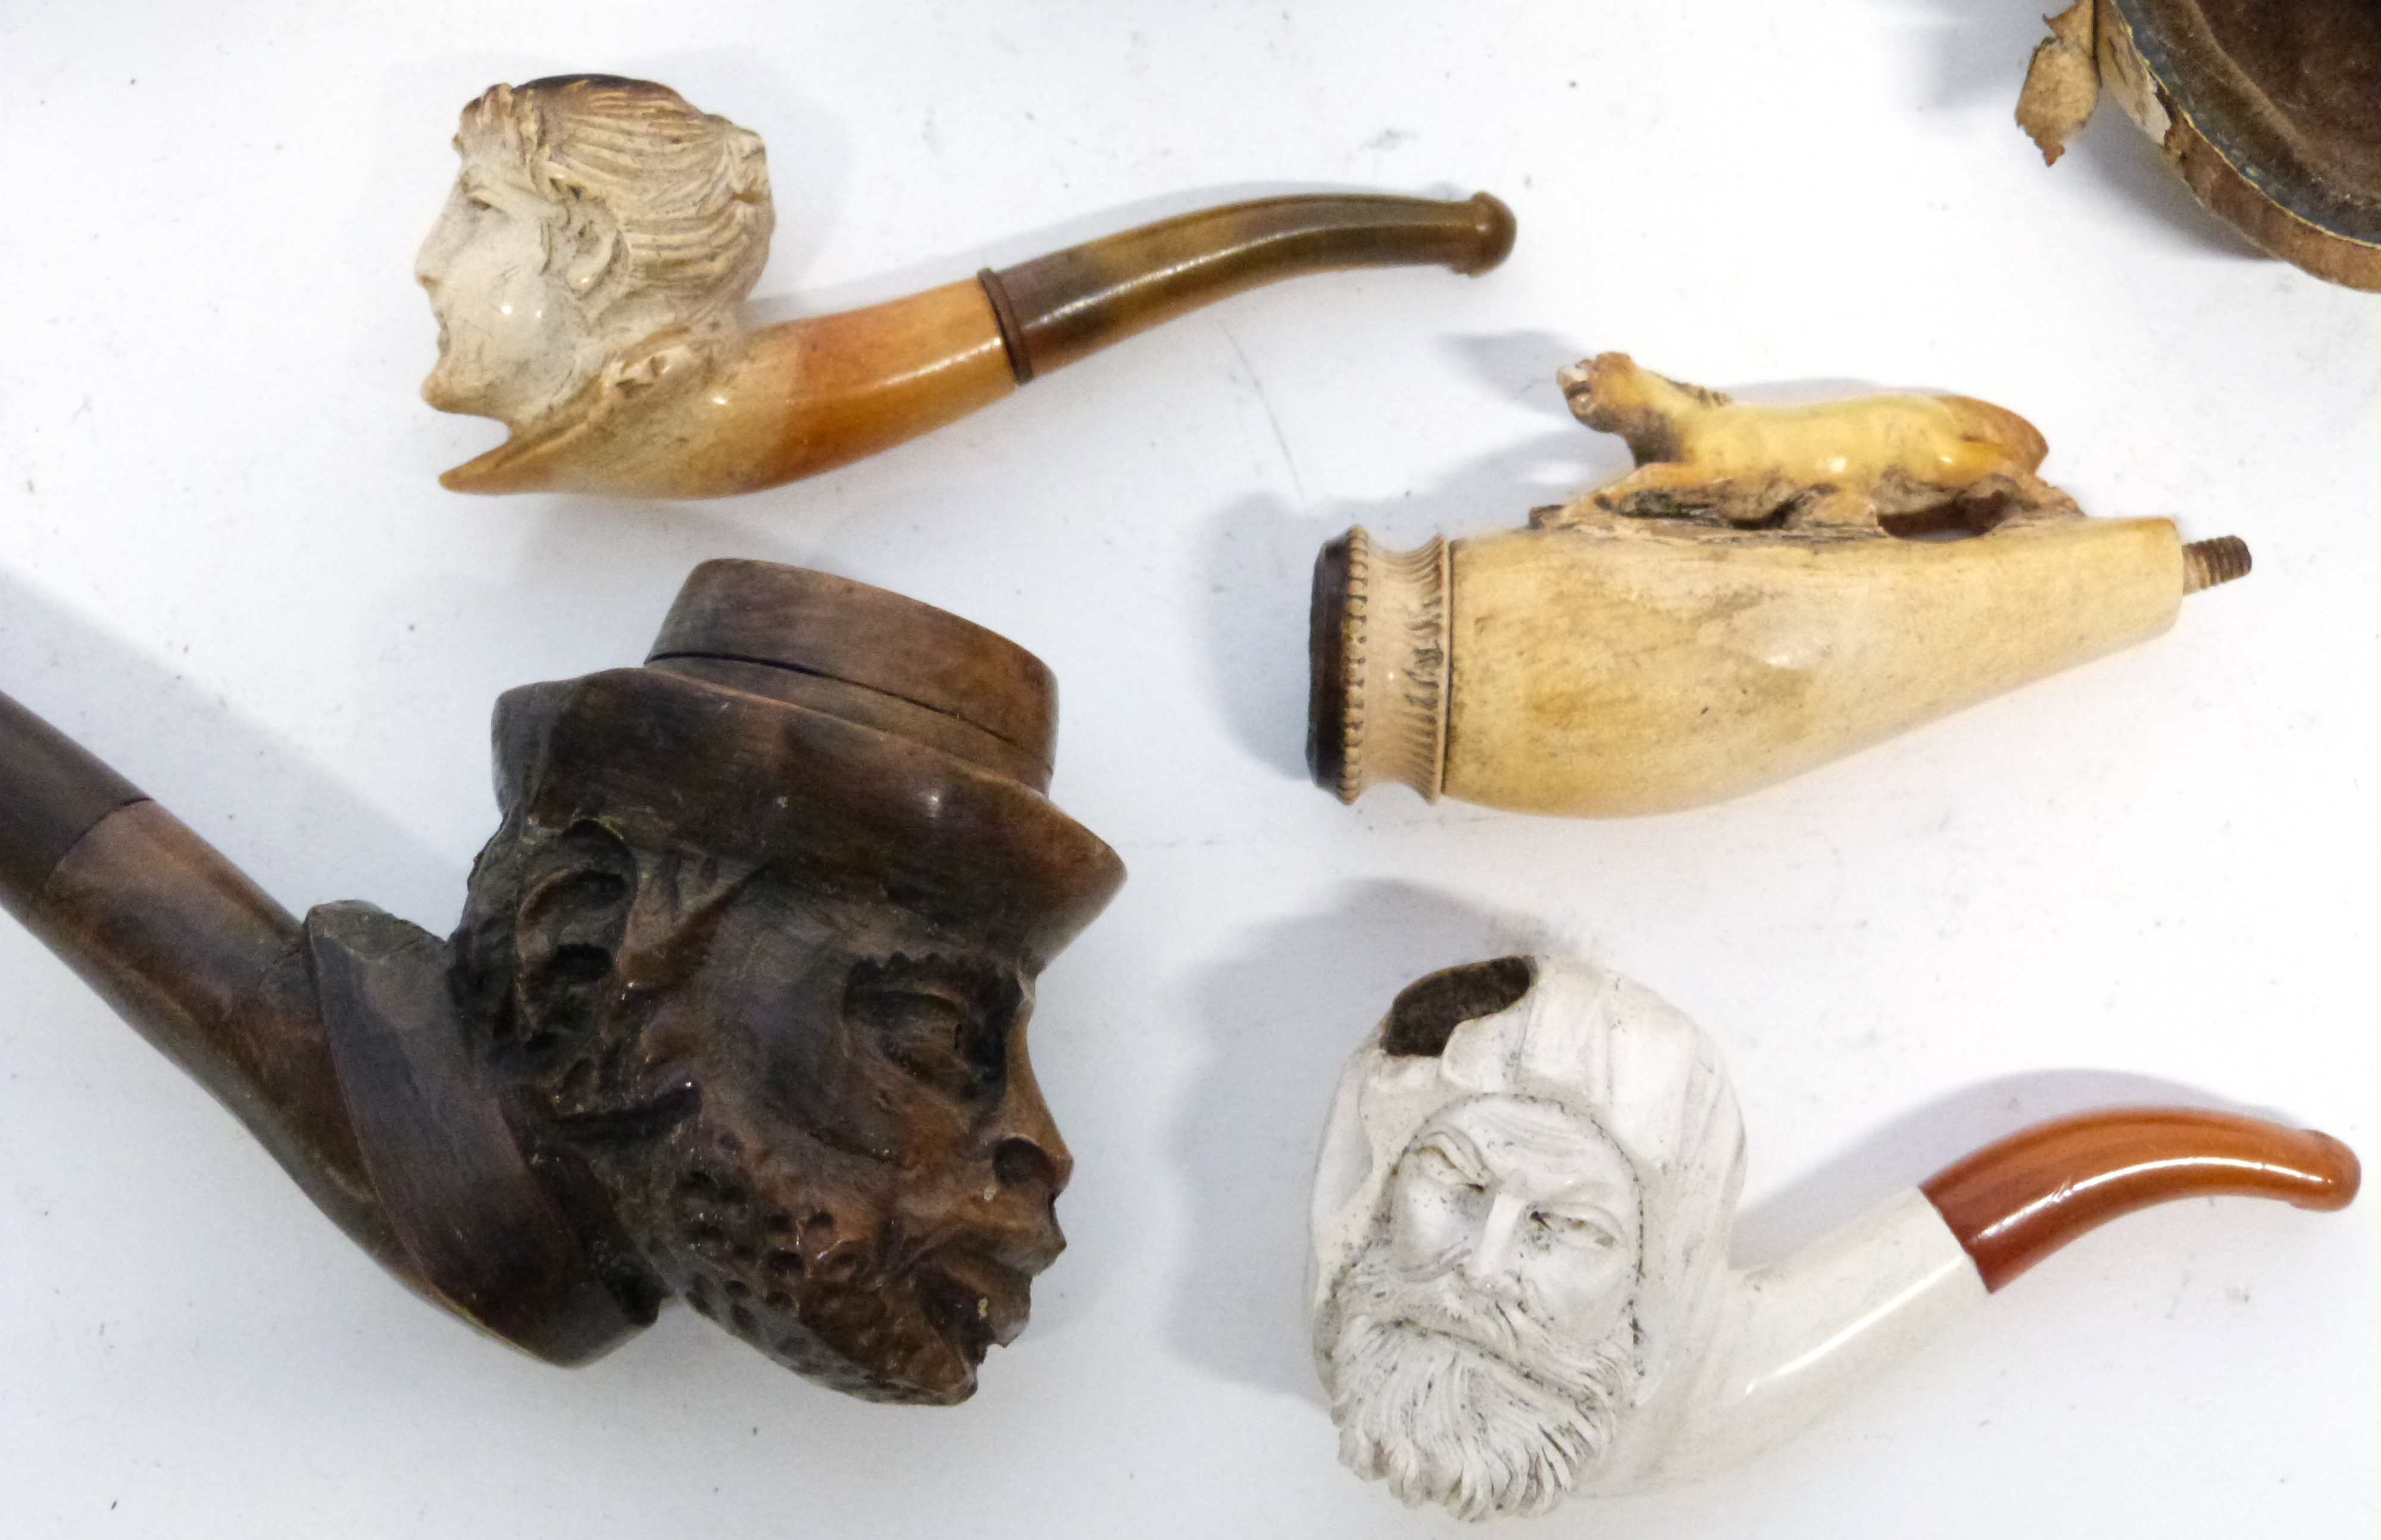 Small plastic case containing a Meerschaum type pipe and leather pipe cases (5) - Image 3 of 3